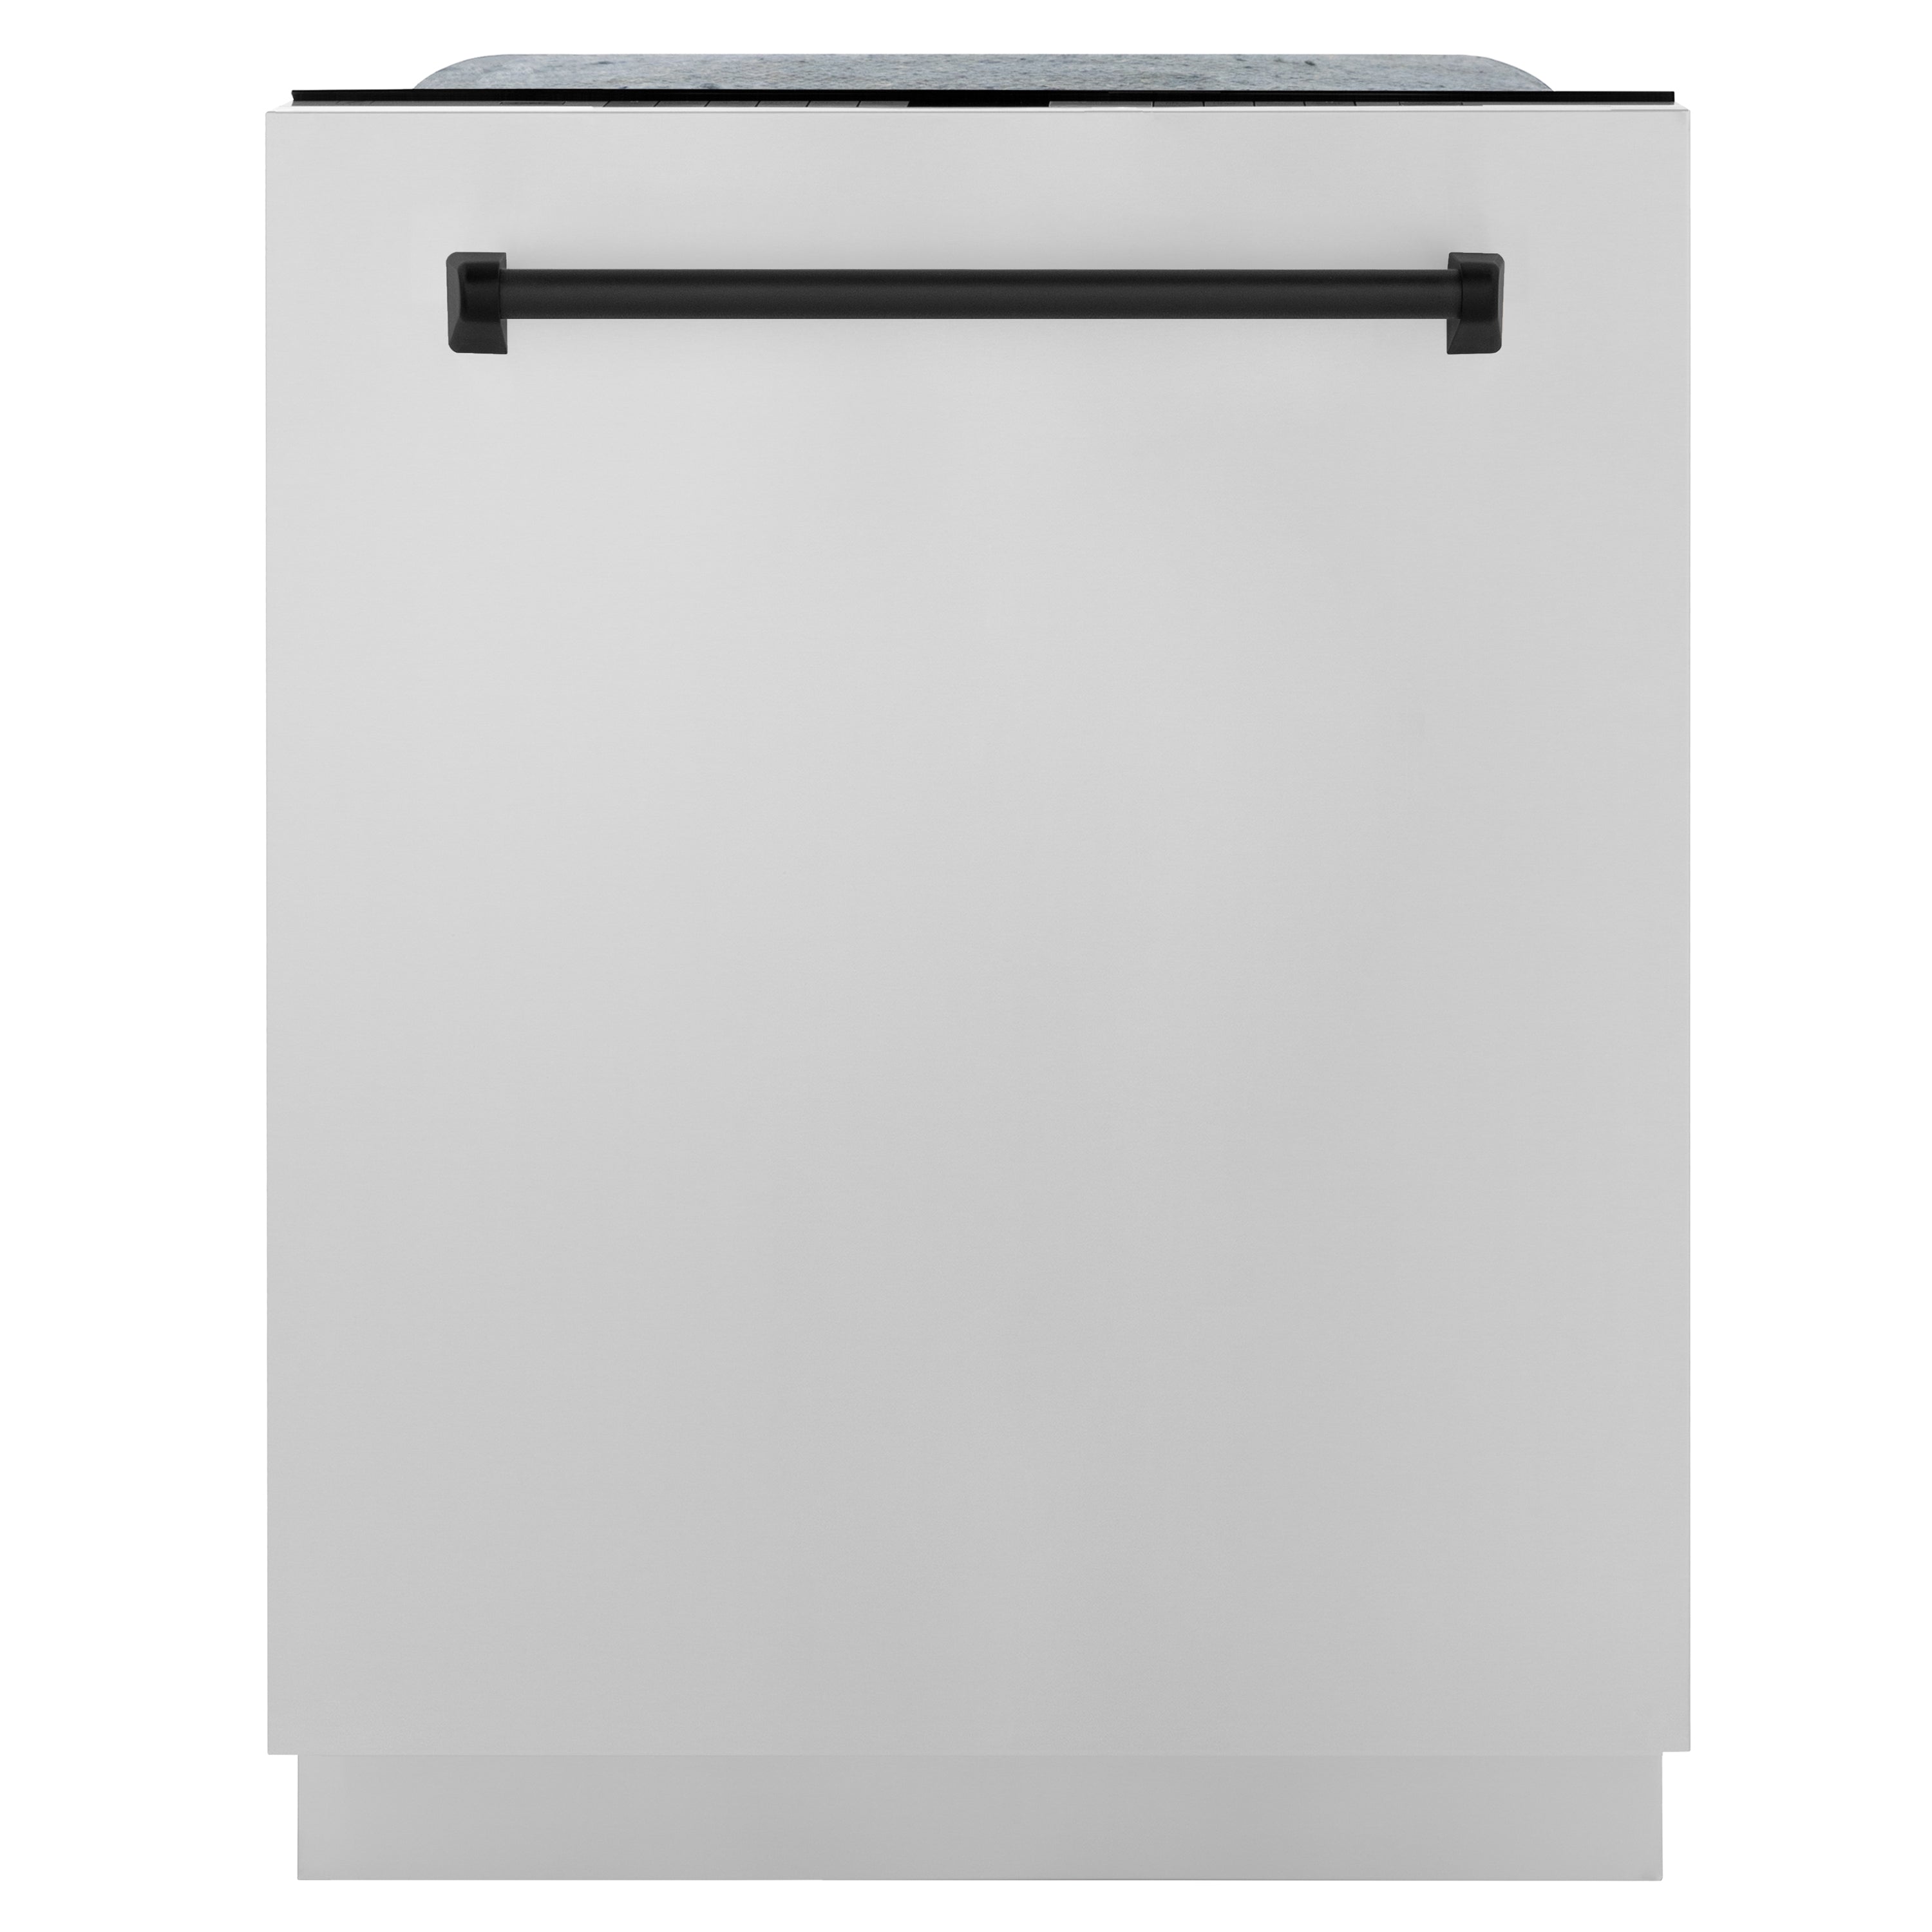 ZLINE Autograph Edition 24" 3rd Rack Top Touch Control Tall Tub Dishwasher in Stainless Steel with Accent Handle, 51dBa - DWMTZ-304-24